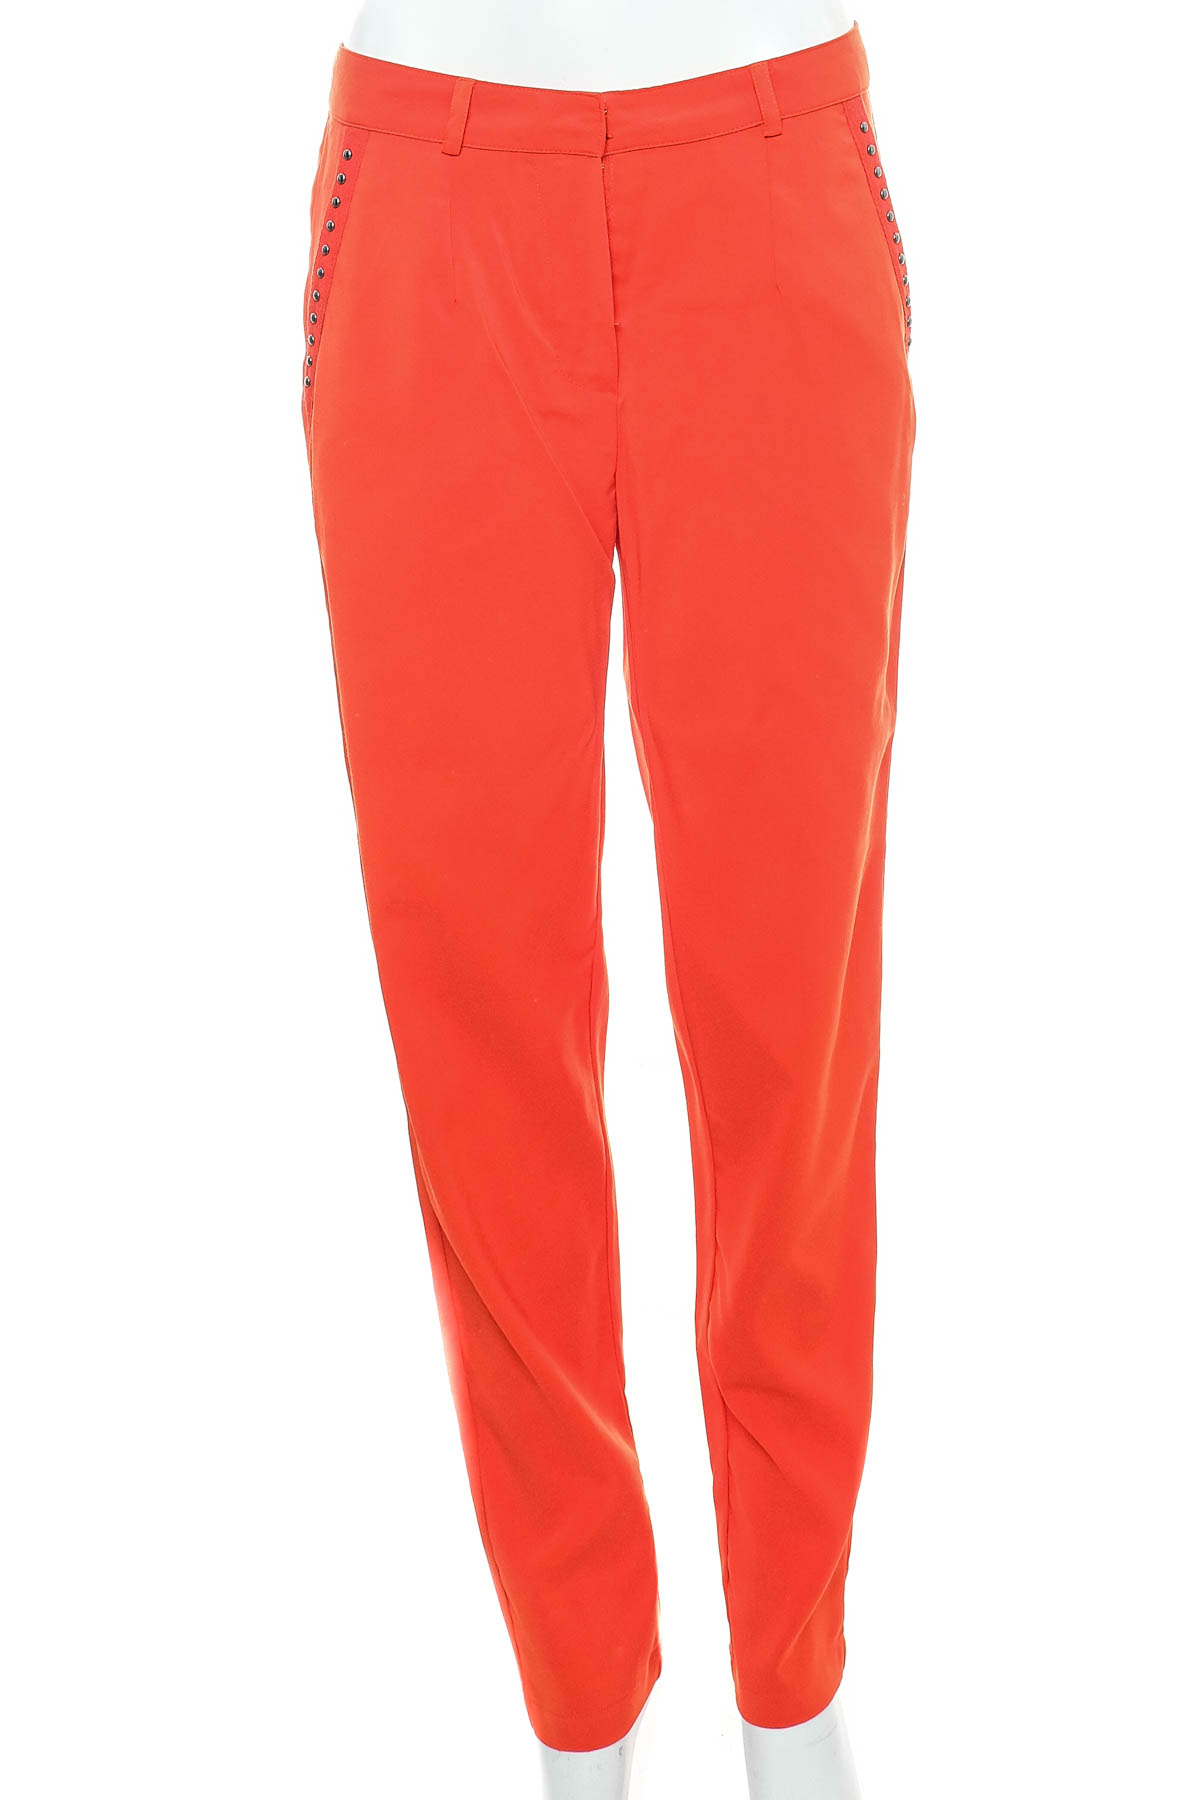 Women's trousers - Trend BY CAPTAIN TORTUE - 0